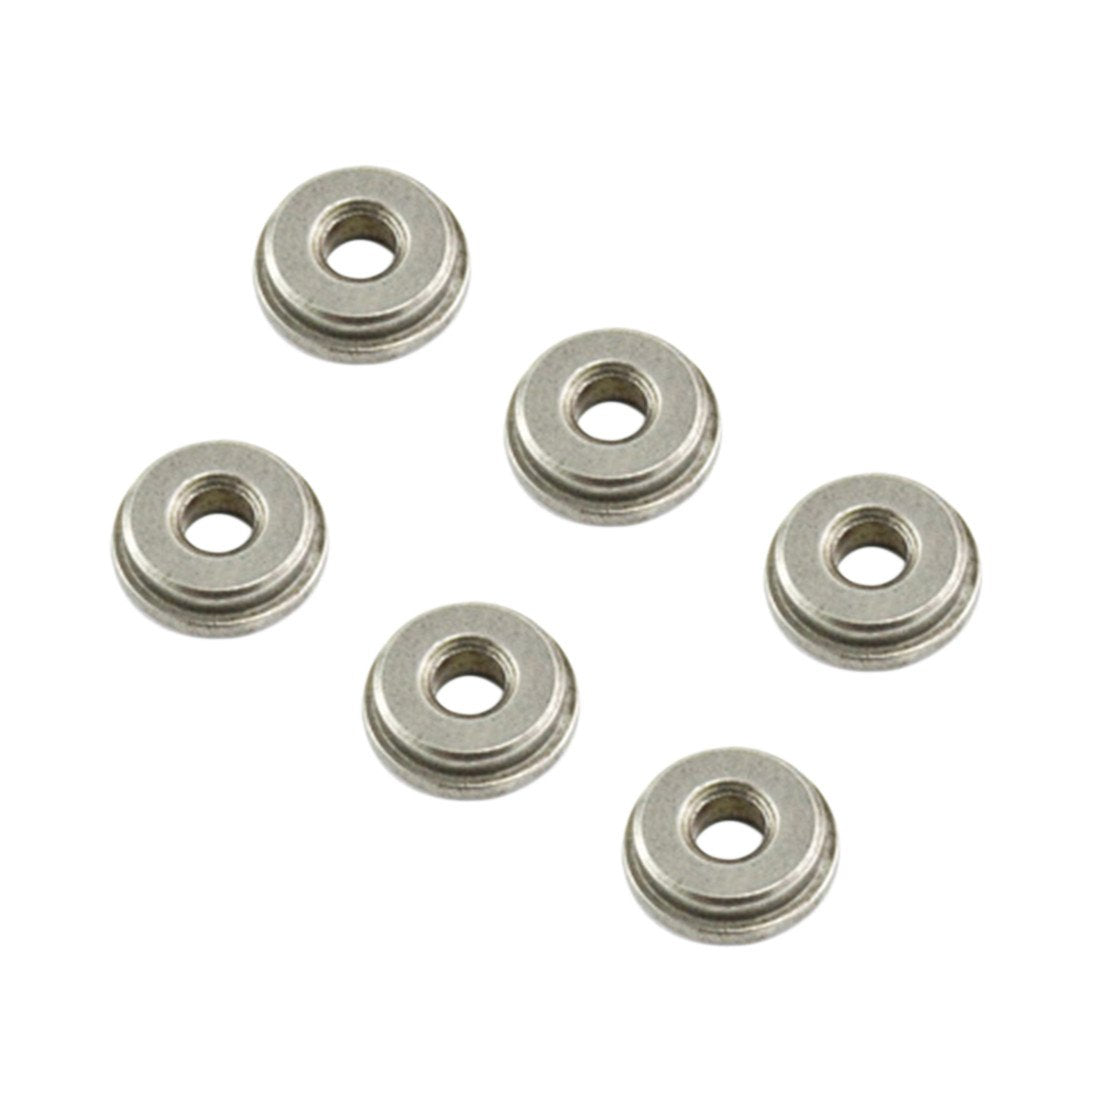 SHS 8mm Stainless Steel Bushing - AH Tactical 